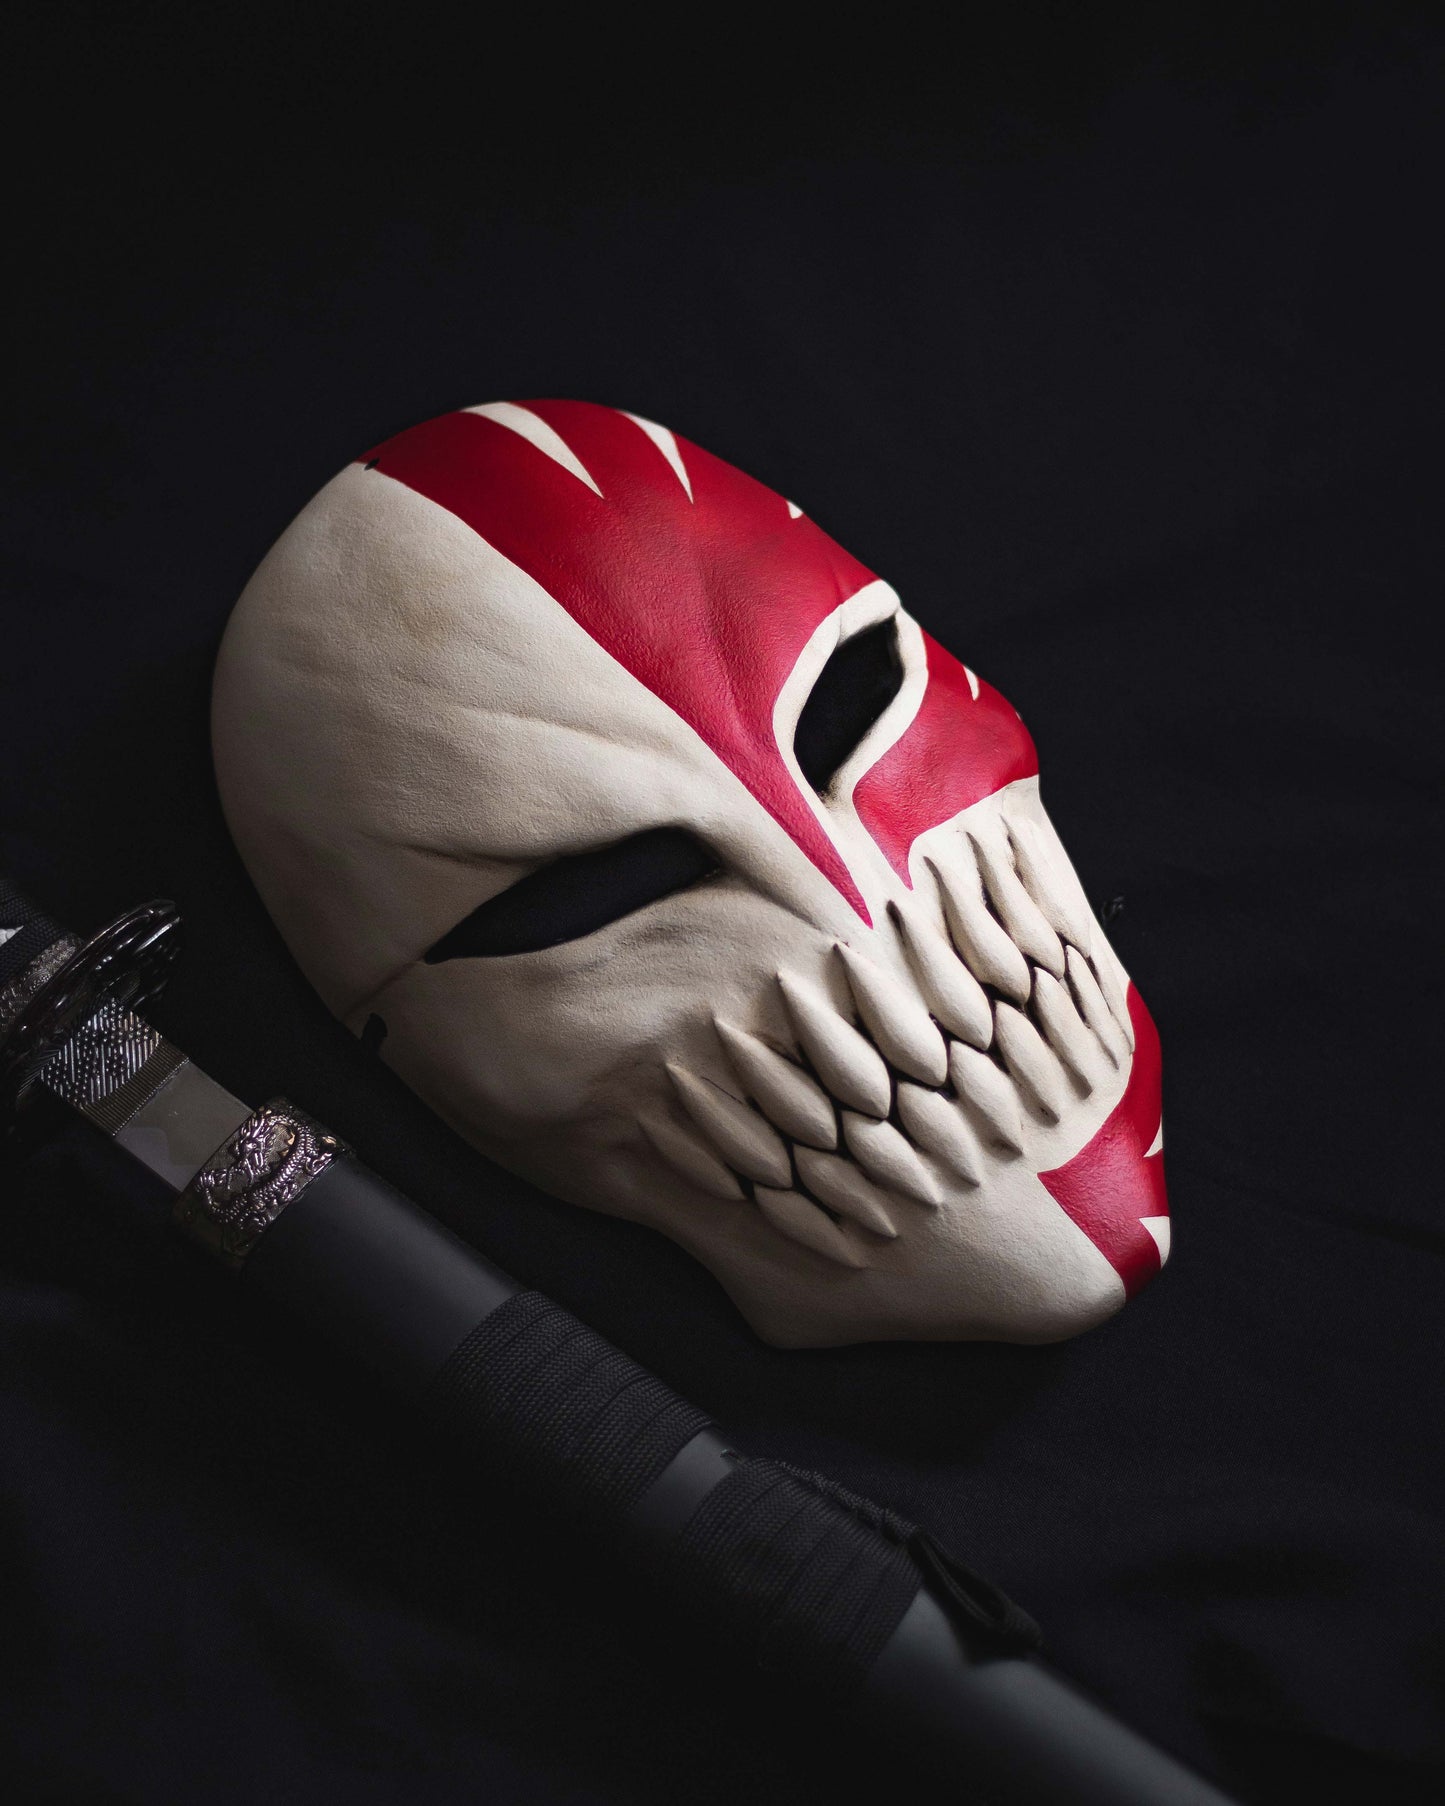 Hollow Mask